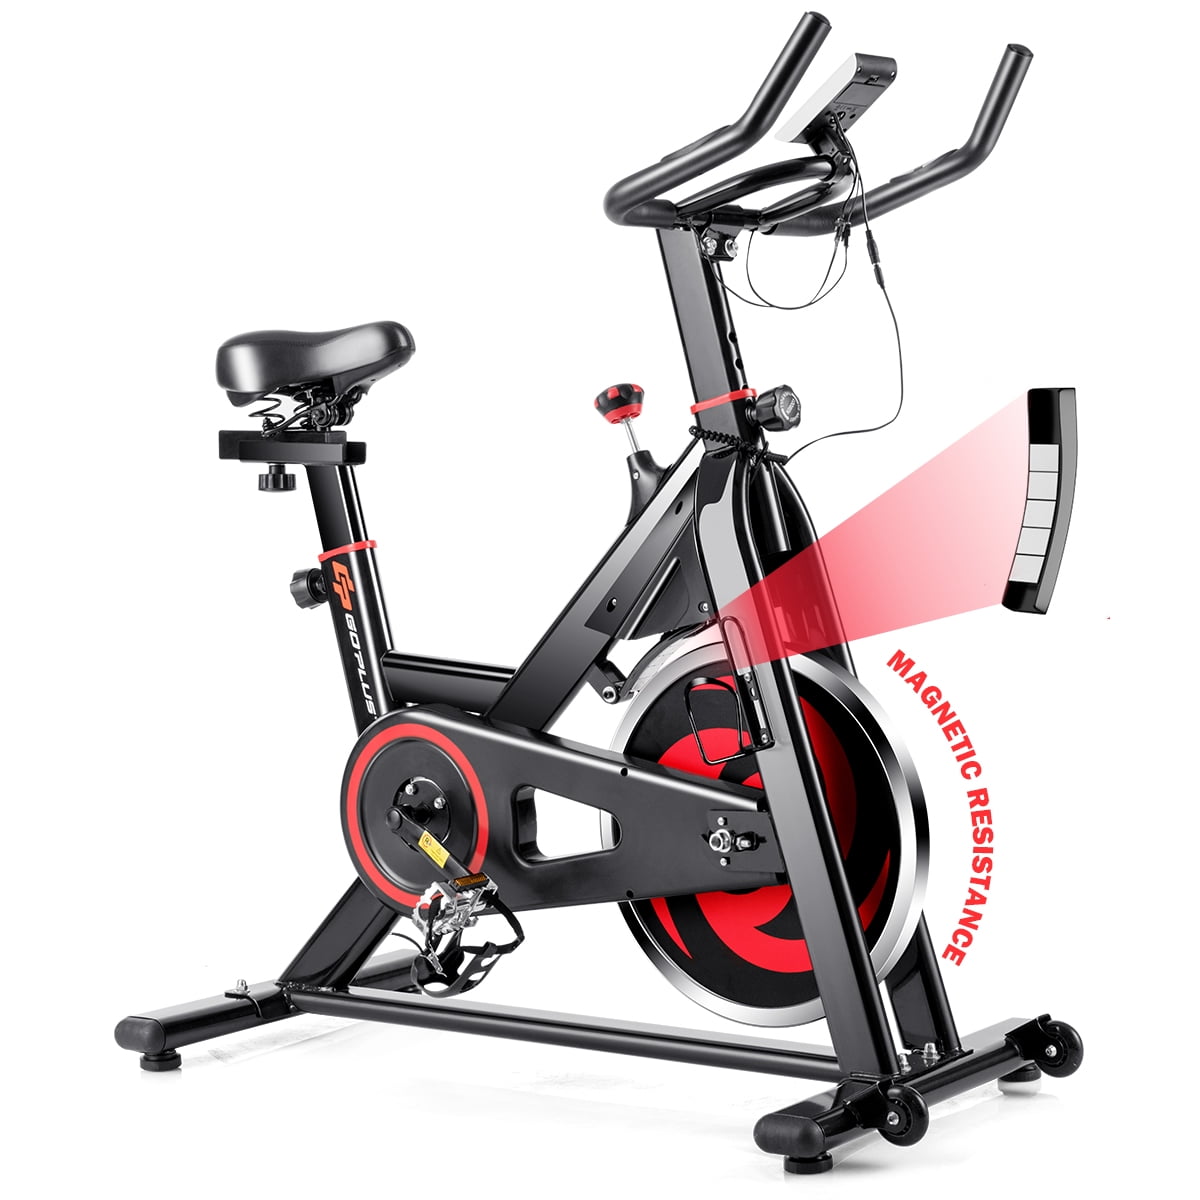 Pro Exercise Bike Stationary Bicycle Trainer Fitness Cardio Cycling Training Gym 